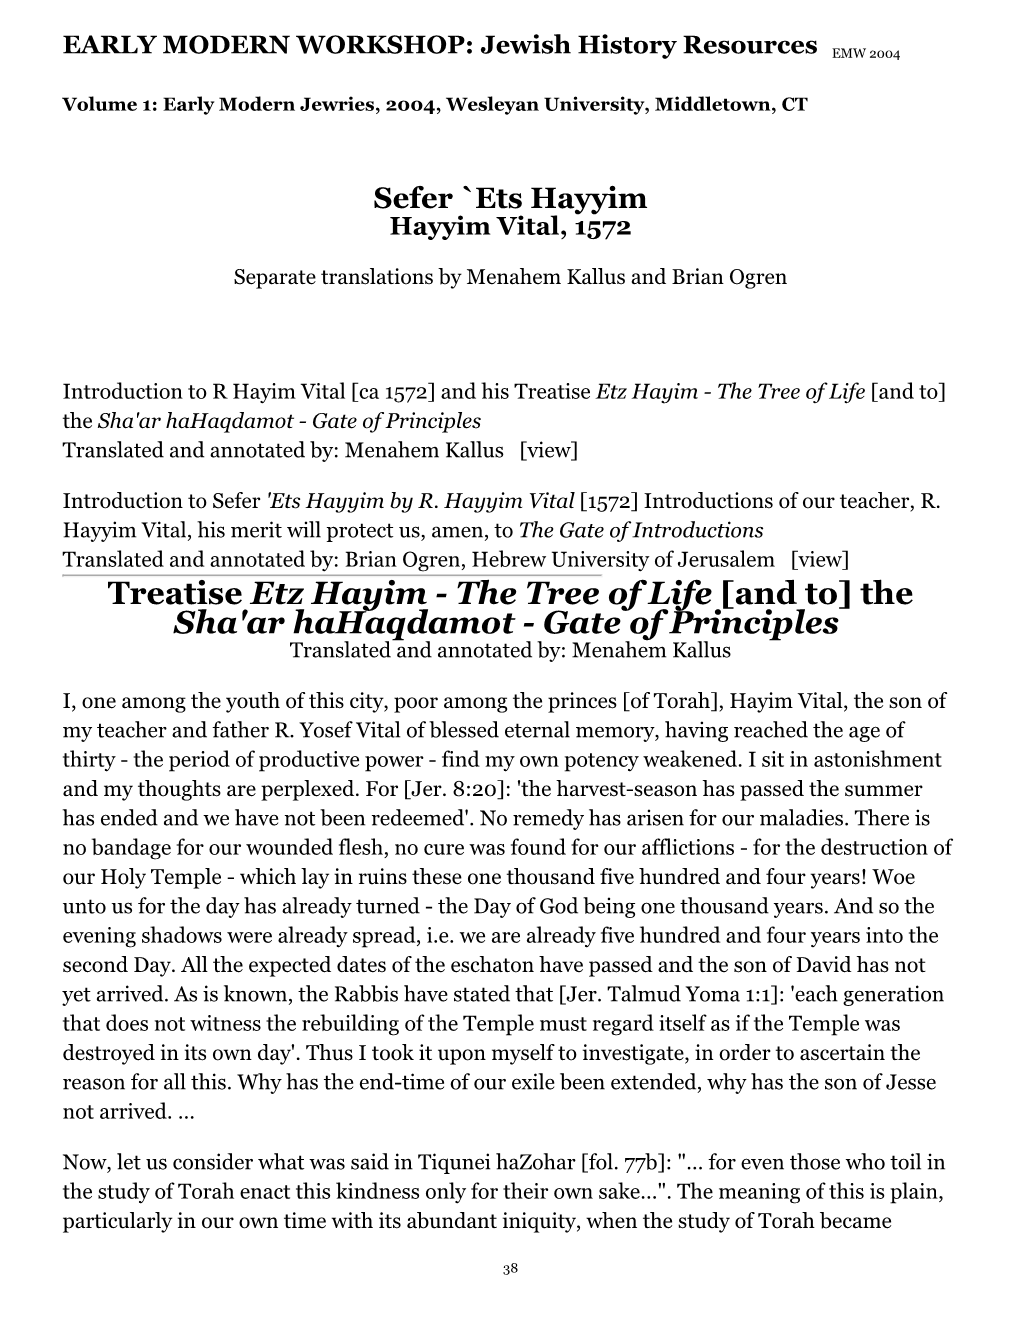 Treatise Etz Hayim - the Tree of Life [And To] the Sha'ar Hahaqdamot - Gate of Principles Translated and Annotated By: Menahem Kallus [View]